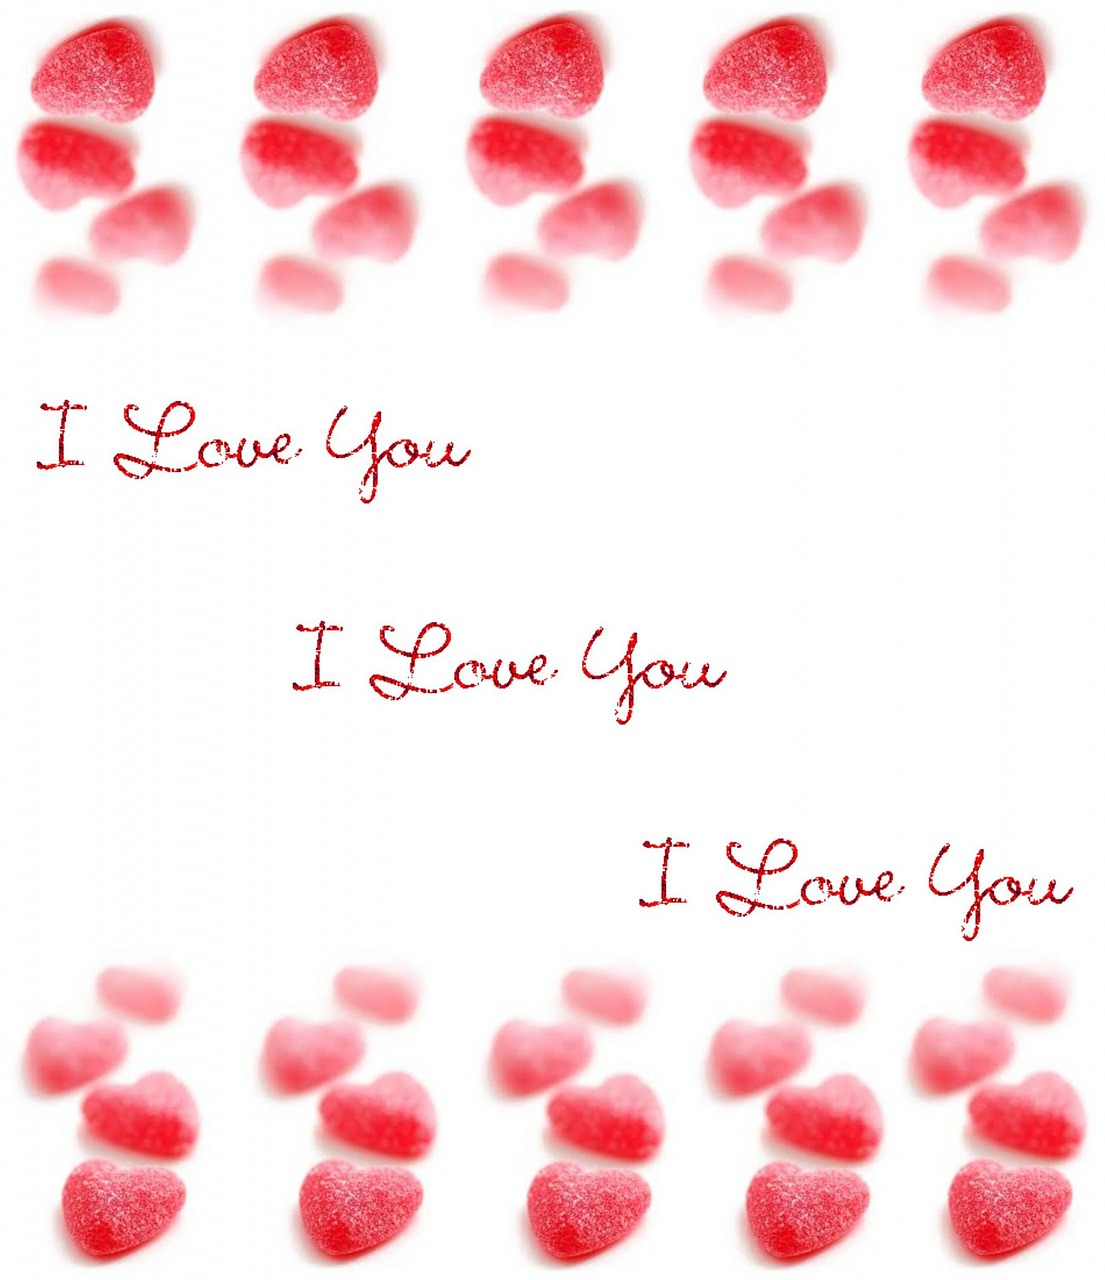 I Love You Heart Wallpapers